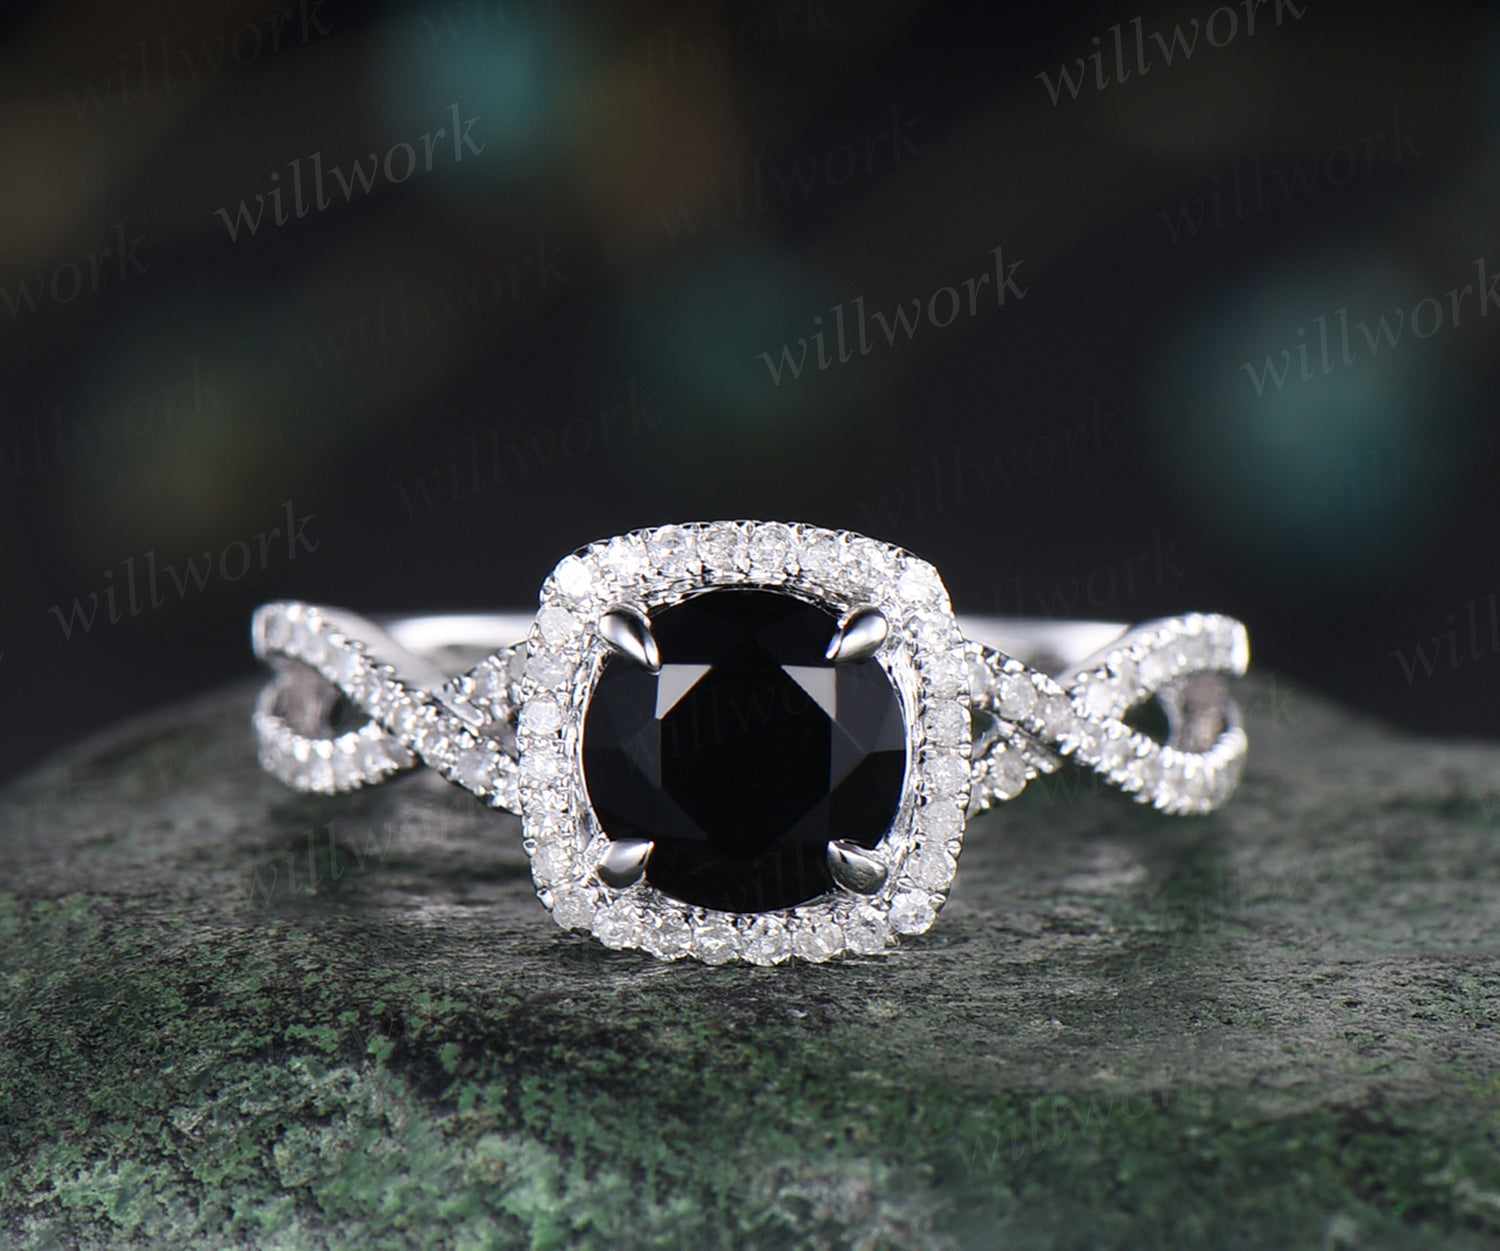 925 Sterling Silver Halo Square Diamond Wedding Ring Set For Women Elegant  Princess Jewelry With Cross Cut AAAAA CZ Engagement Rings 220113 From  Zhao05, $33.6 | DHgate.Com